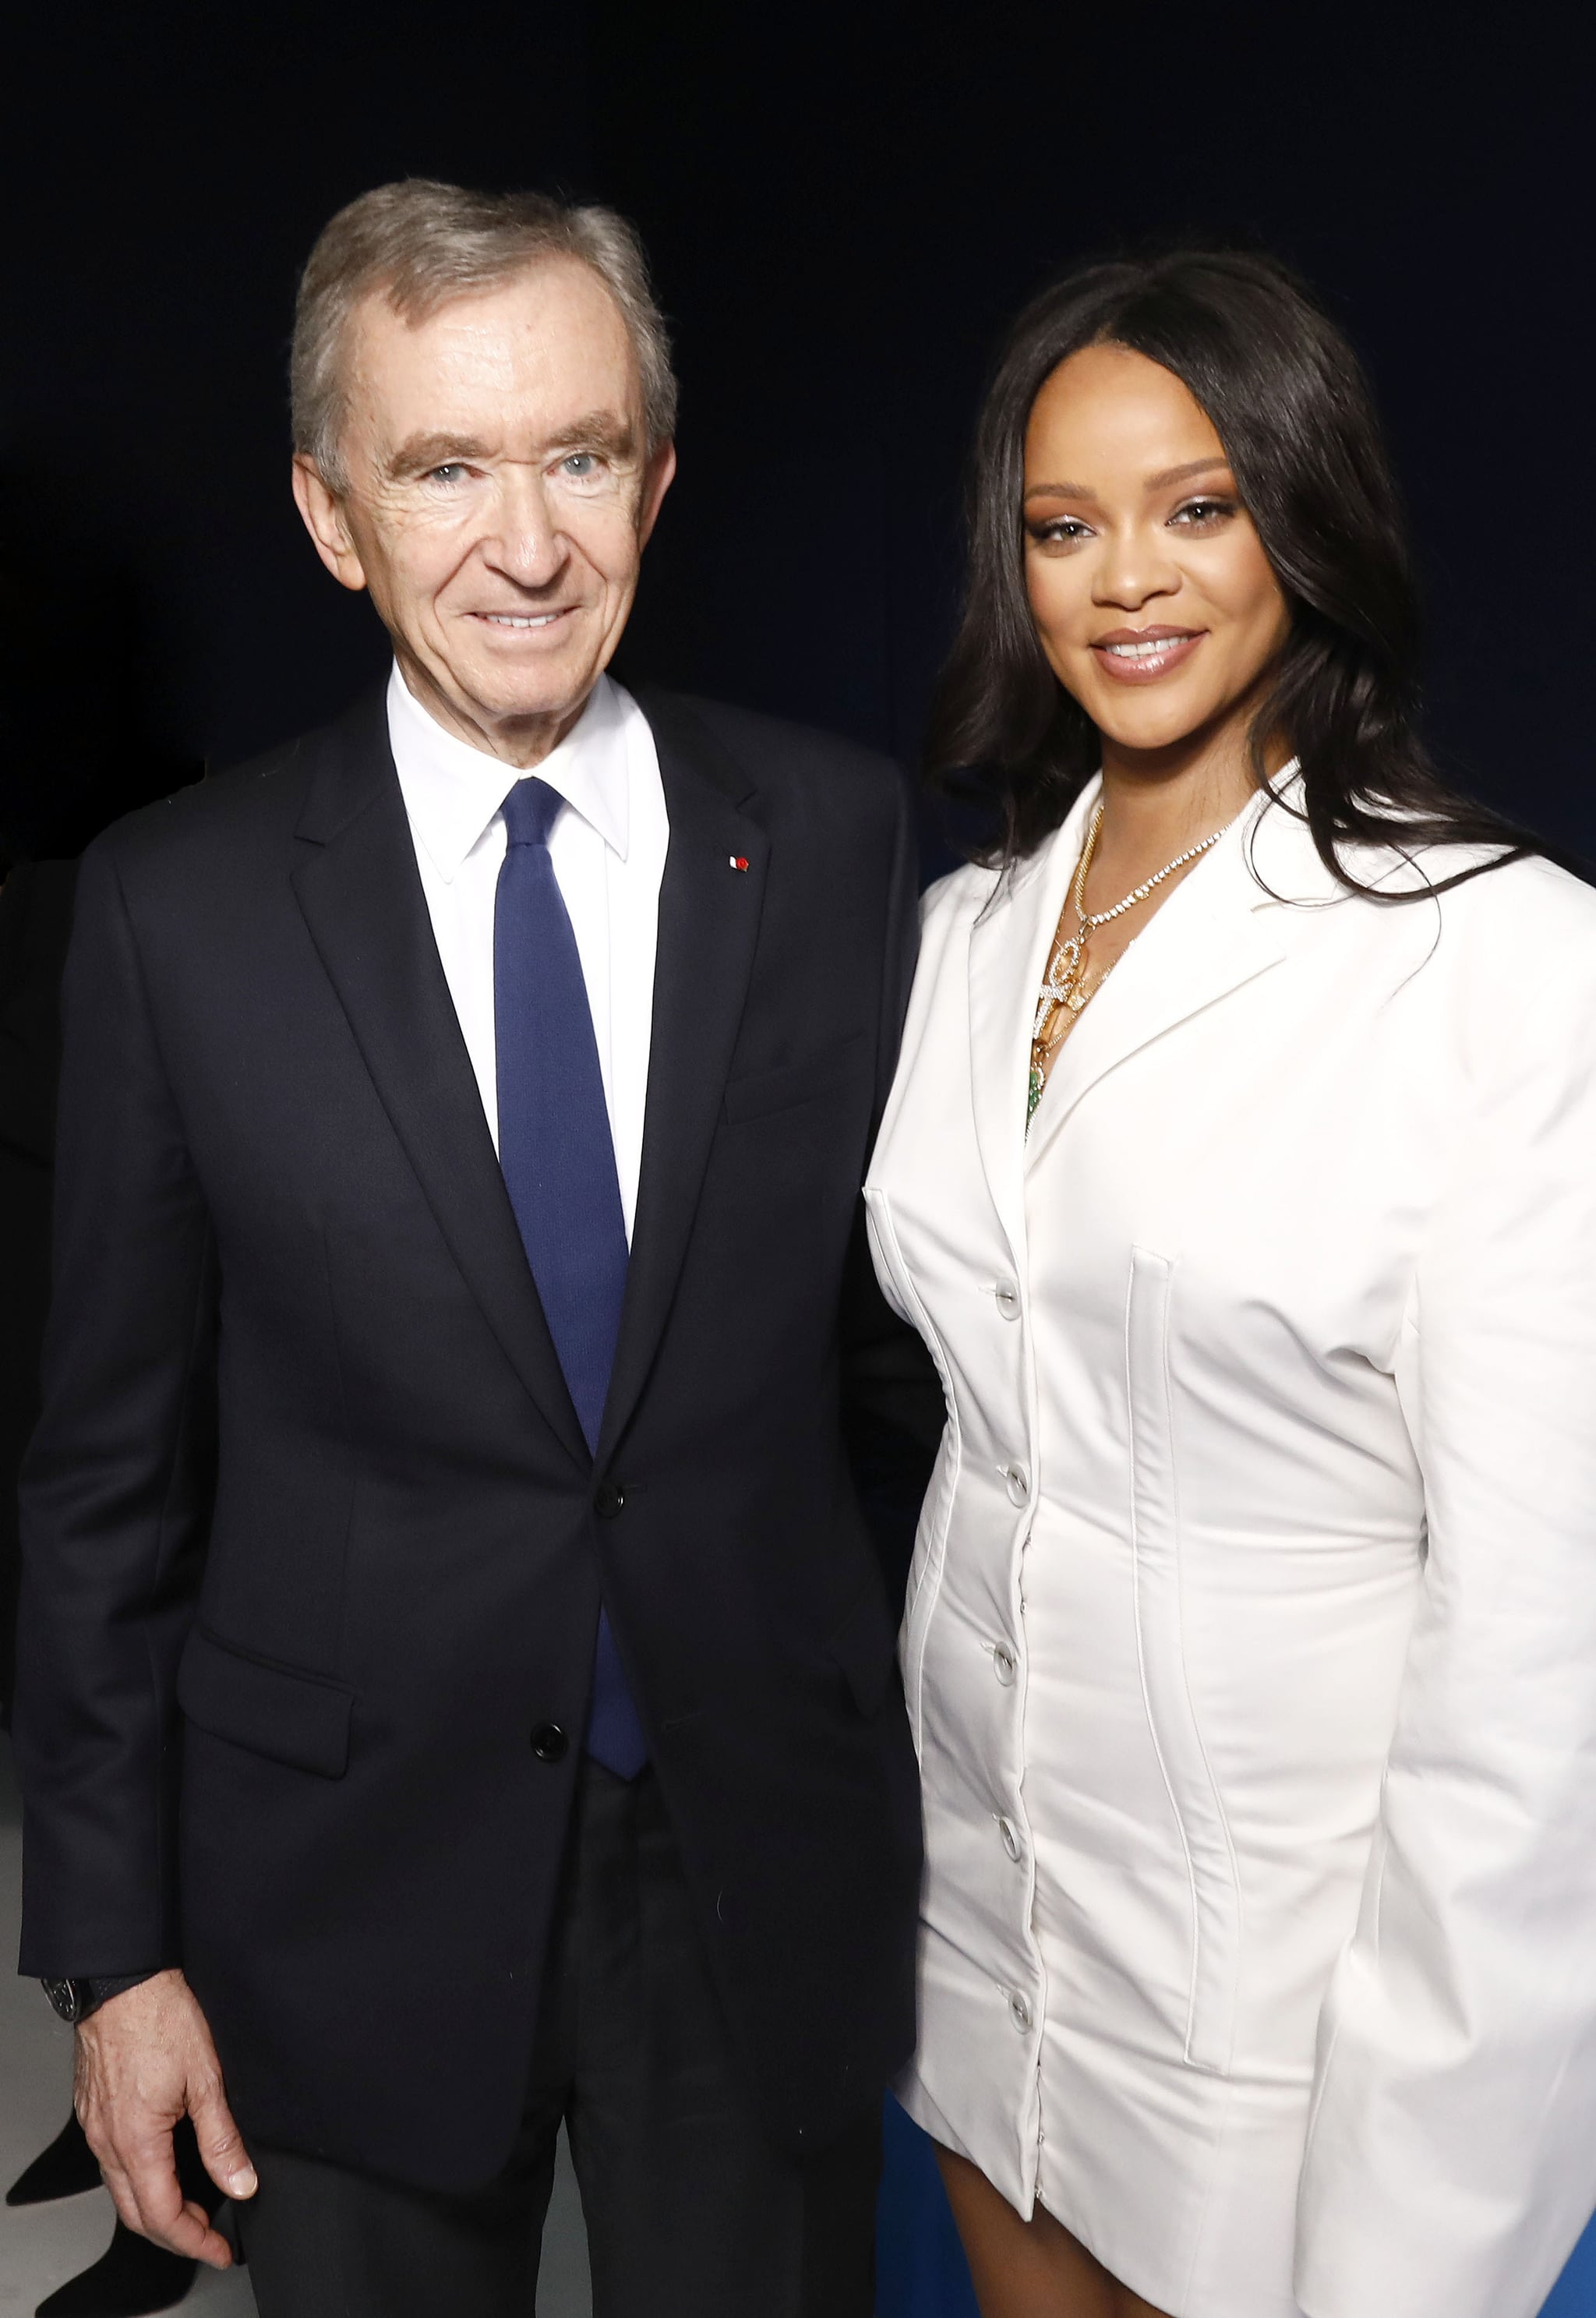 PARIS, FRANCE - MAY 22: Bernard Arnault and Rihanna attend Fenty Launch on May 22, 2019 in Paris, France. (Photo by Julien Hekimian/Getty Images for Fenty)